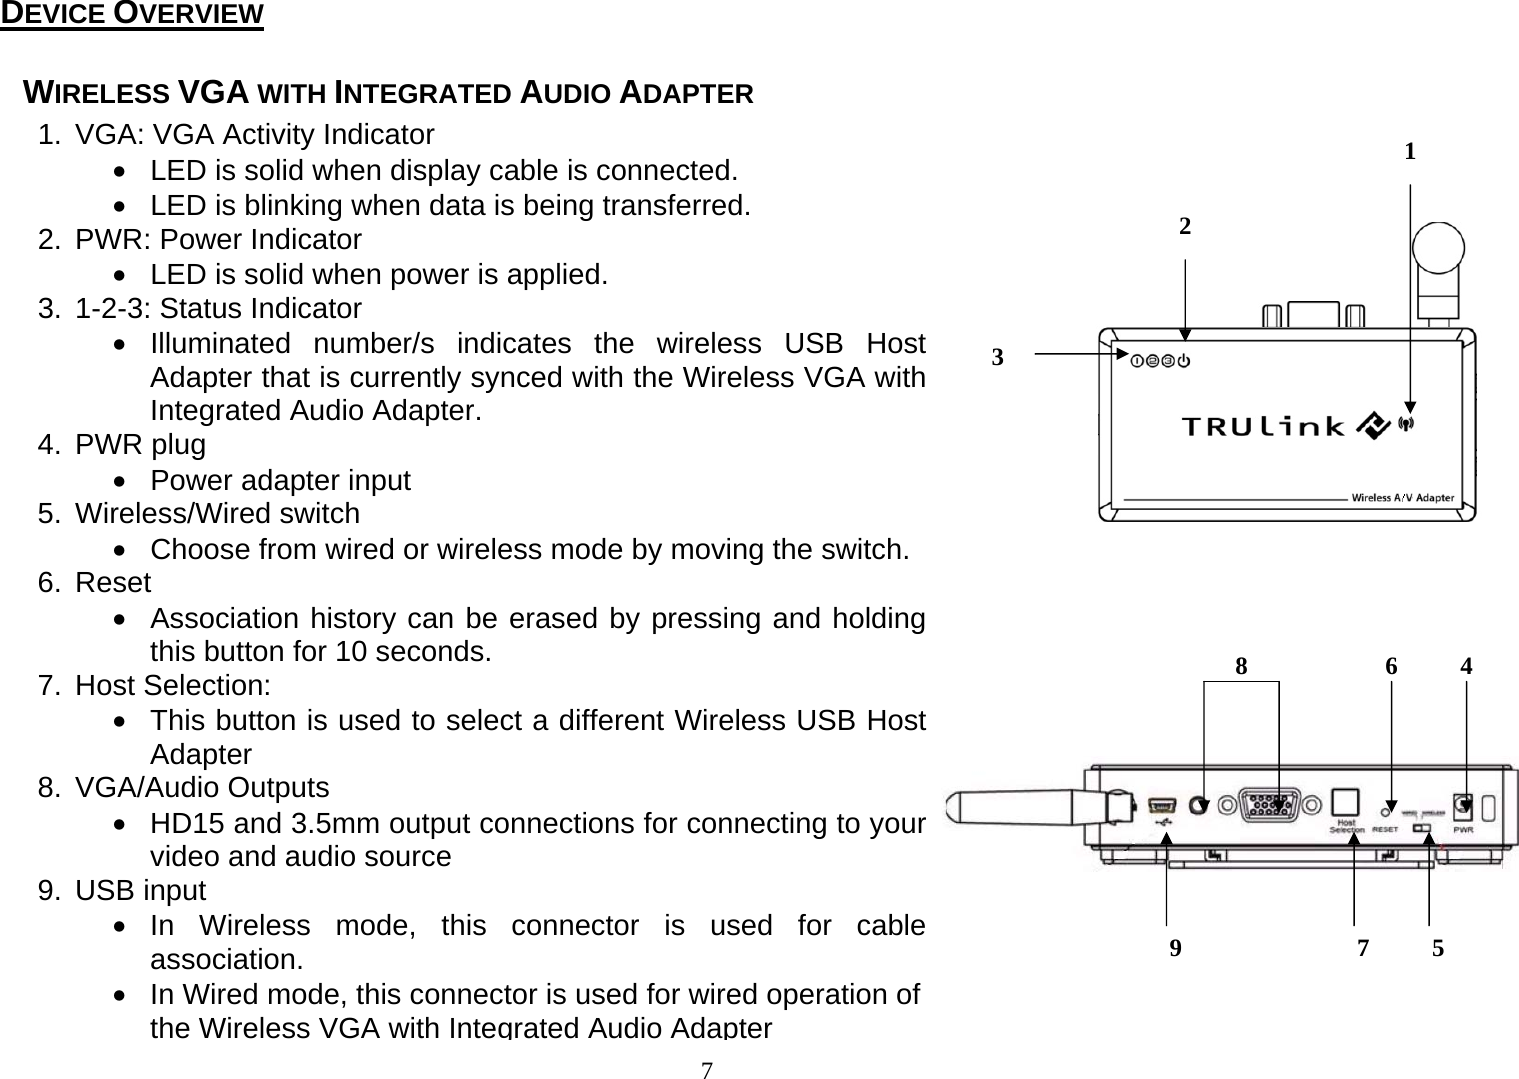 7 1.  VGA: VGA Activity Indicator •  LED is solid when display cable is connected. •  LED is blinking when data is being transferred. 2. PWR: Power Indicator •  LED is solid when power is applied. 3.  1-2-3: Status Indicator • Illuminated number/s indicates the wireless USB Host Adapter that is currently synced with the Wireless VGA with Integrated Audio Adapter. 4. PWR plug • Power adapter input 5. Wireless/Wired switch •  Choose from wired or wireless mode by moving the switch. 6. Reset •  Association history can be erased by pressing and holding this button for 10 seconds. 7. Host Selection: •  This button is used to select a different Wireless USB Host Adapter 8. VGA/Audio Outputs •  HD15 and 3.5mm output connections for connecting to your video and audio source 9. USB input • In Wireless mode, this connector is used for cable association. •  In Wired mode, this connector is used for wired operation of the Wireless VGA with Integrated Audio Adapter34 56789WIRELESS VGA WITH INTEGRATED AUDIO ADAPTER                         DEVICE OVERVIEW 12